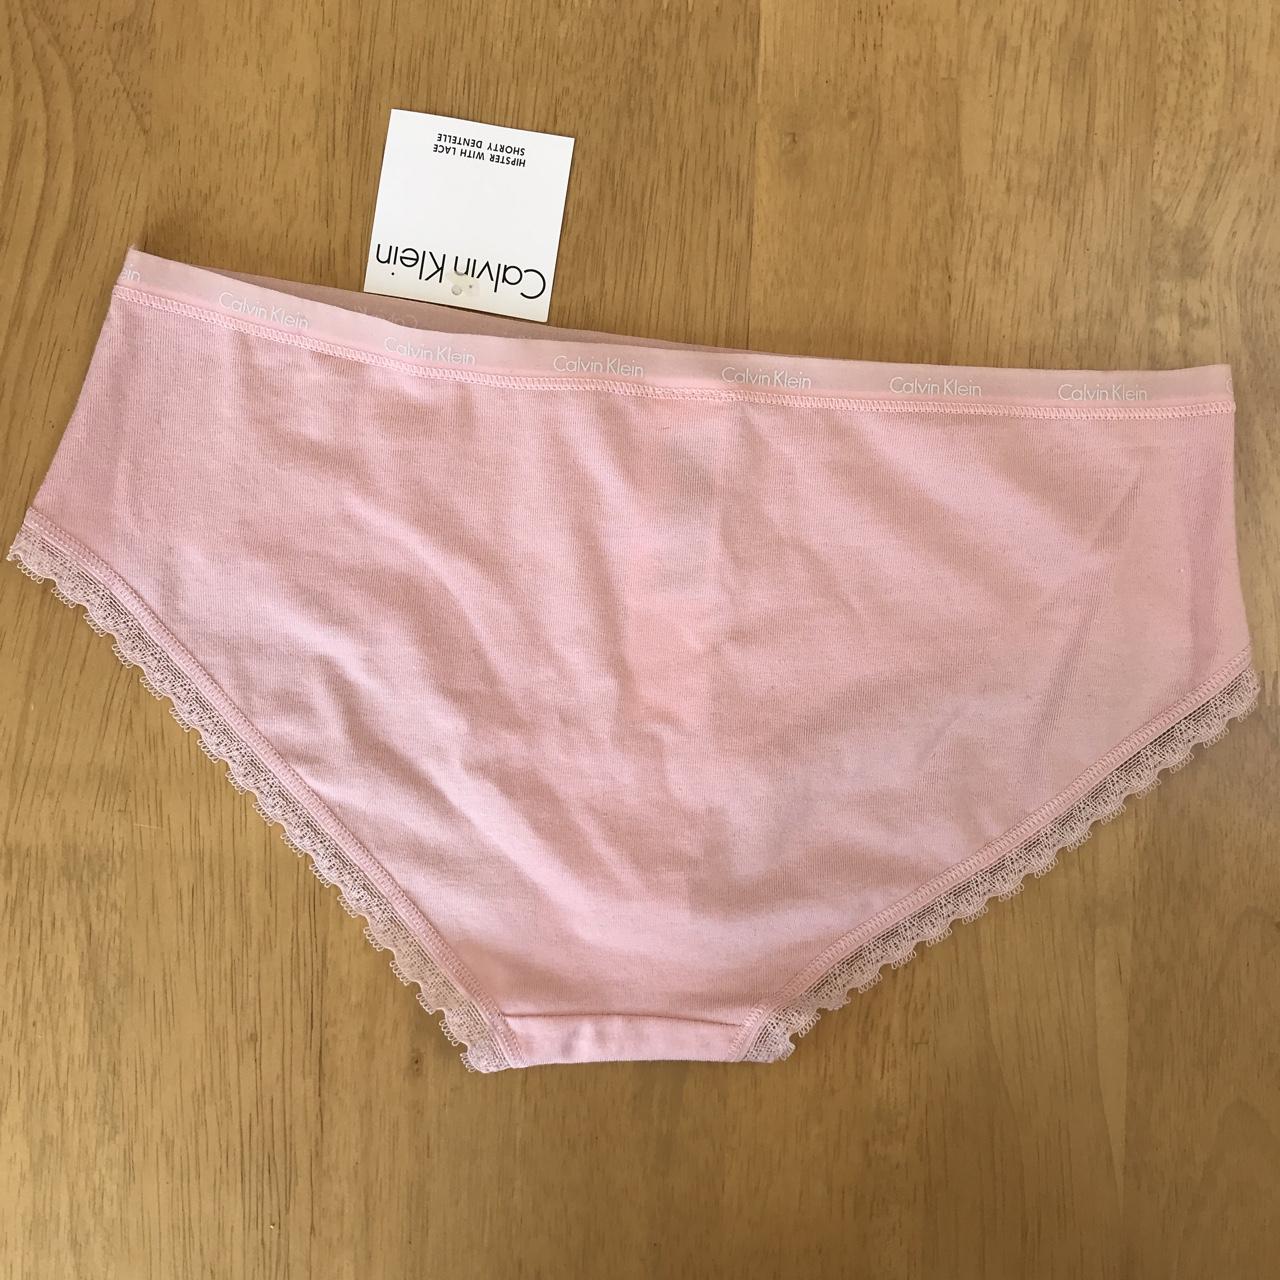 Calvin Klein Underwear, - Size Small , - New with tags